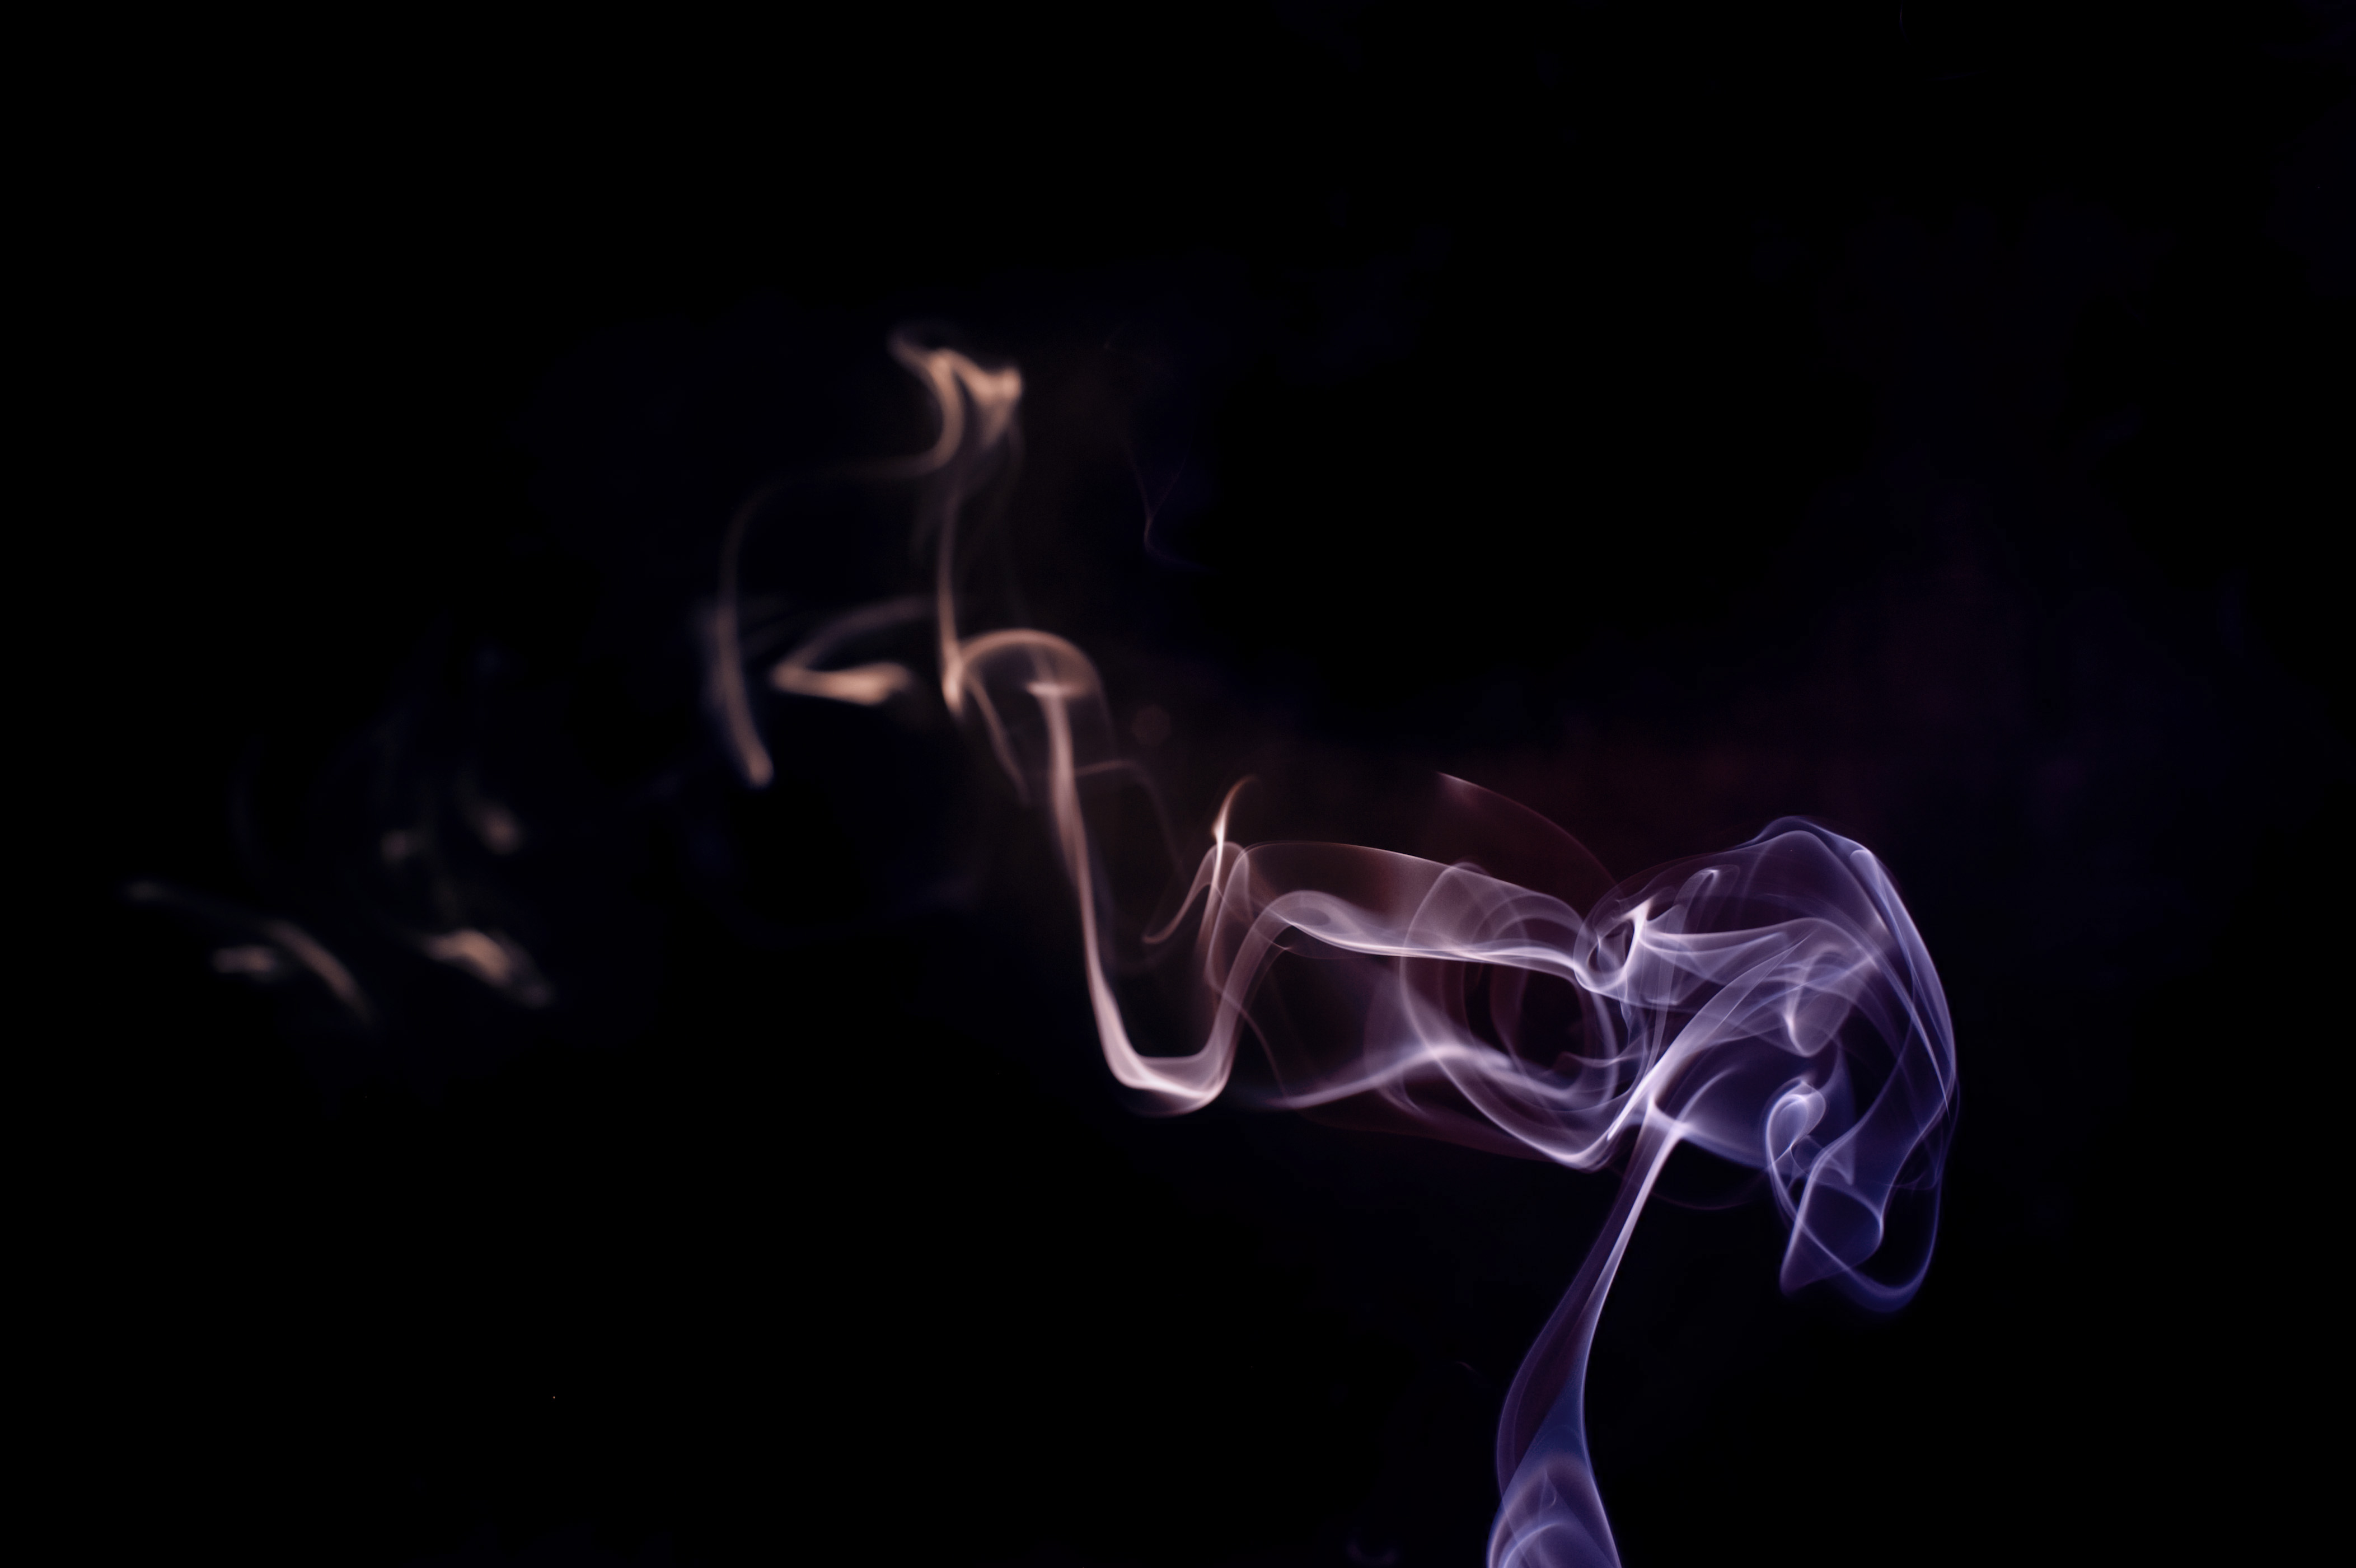 smoke devil | Free backgrounds and textures | Cr103.com